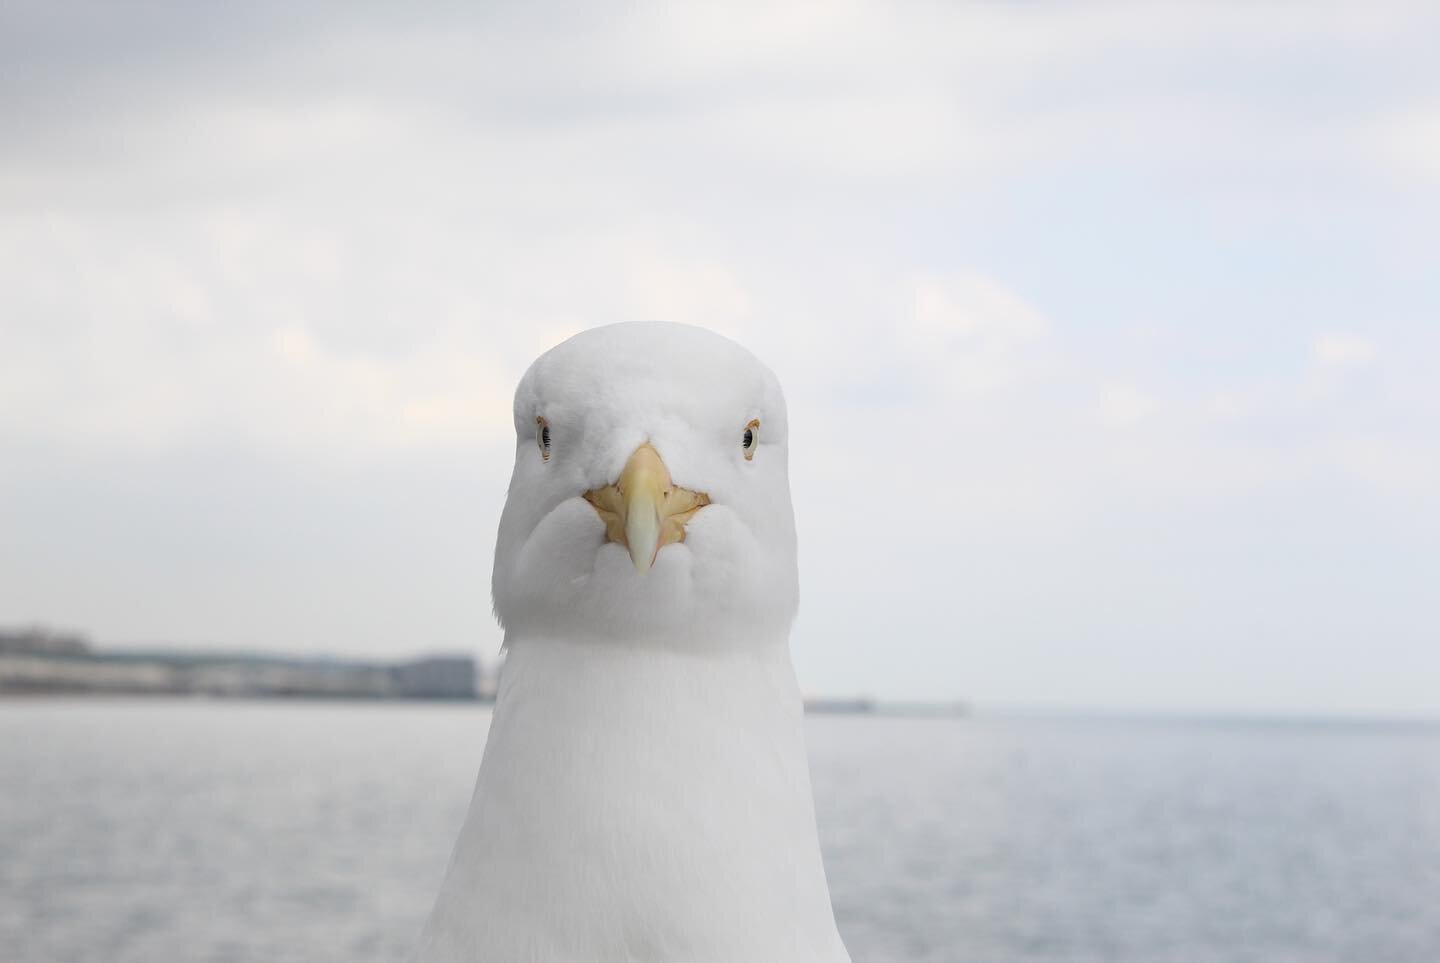 &quot;I cant get over these photos.  It was like the seagull was posing and saying &ldquo;You cant get mad with my for stealing food when I look this good.&rdquo; I feel like its puts seagulls in a positive light as they look really beautiful. I have